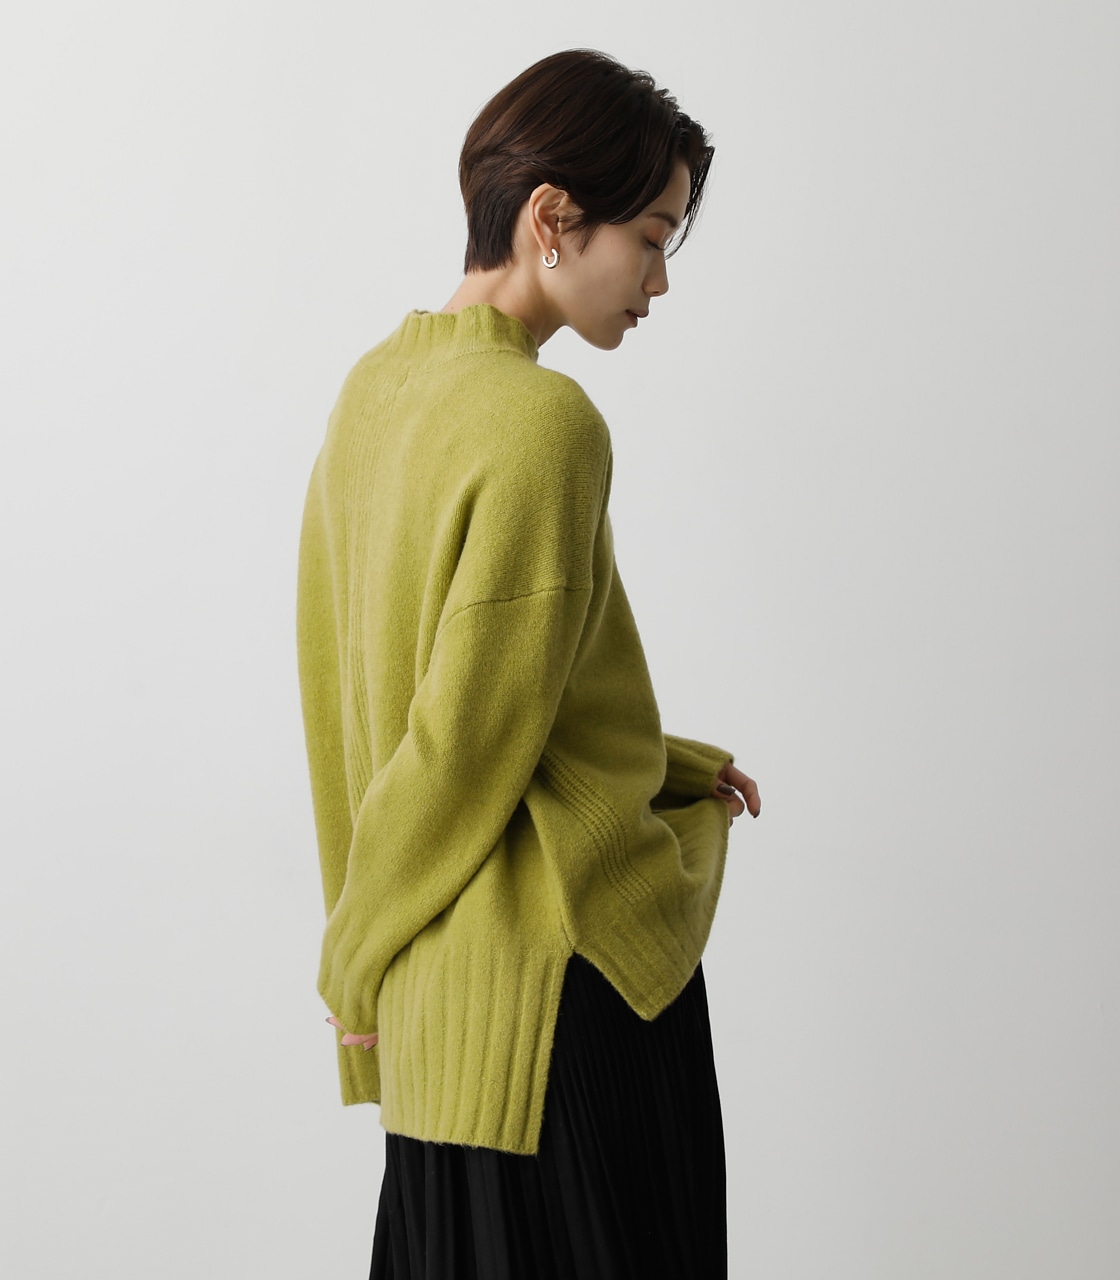 SOFT TOUCH HIGH NECK KNIT TOPS/ソフトタッチハイネックニットトップス 詳細画像 LIME 2